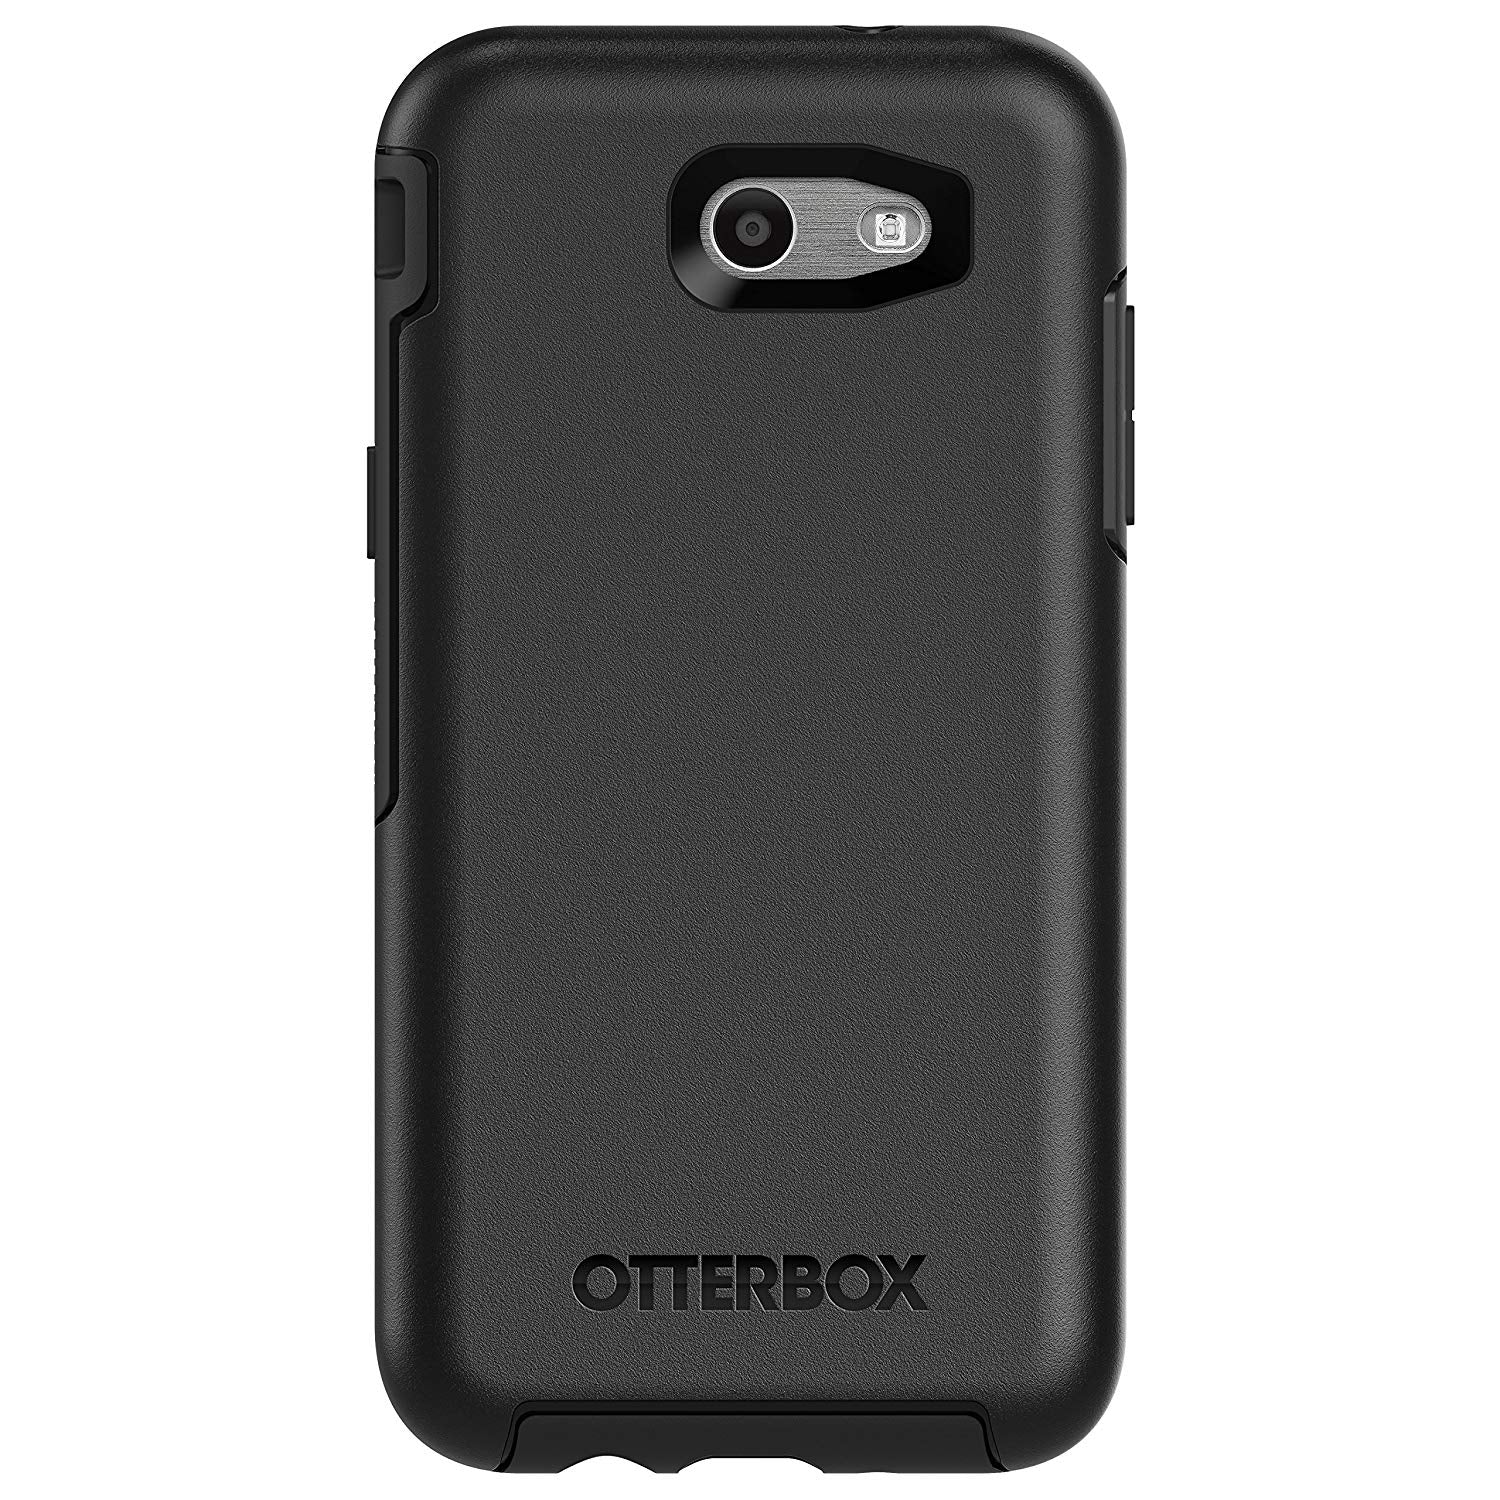 OtterBox SYMMETRY SERIES Case for Samsung Galaxy J3 Emerge - Black (Certified Refurbished)